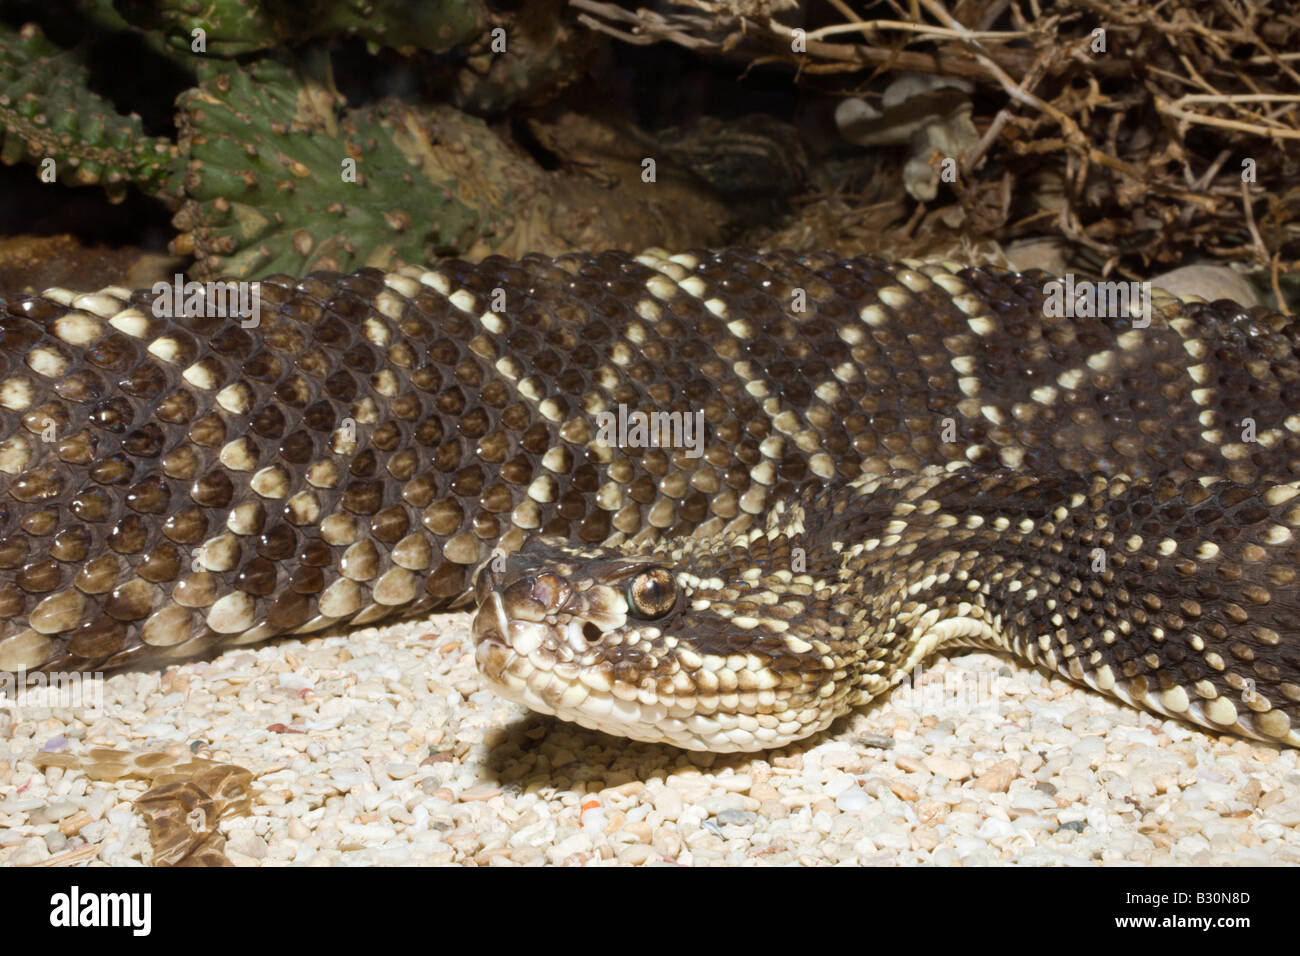 Rattle Snake Crotalus durissus Stock Photo